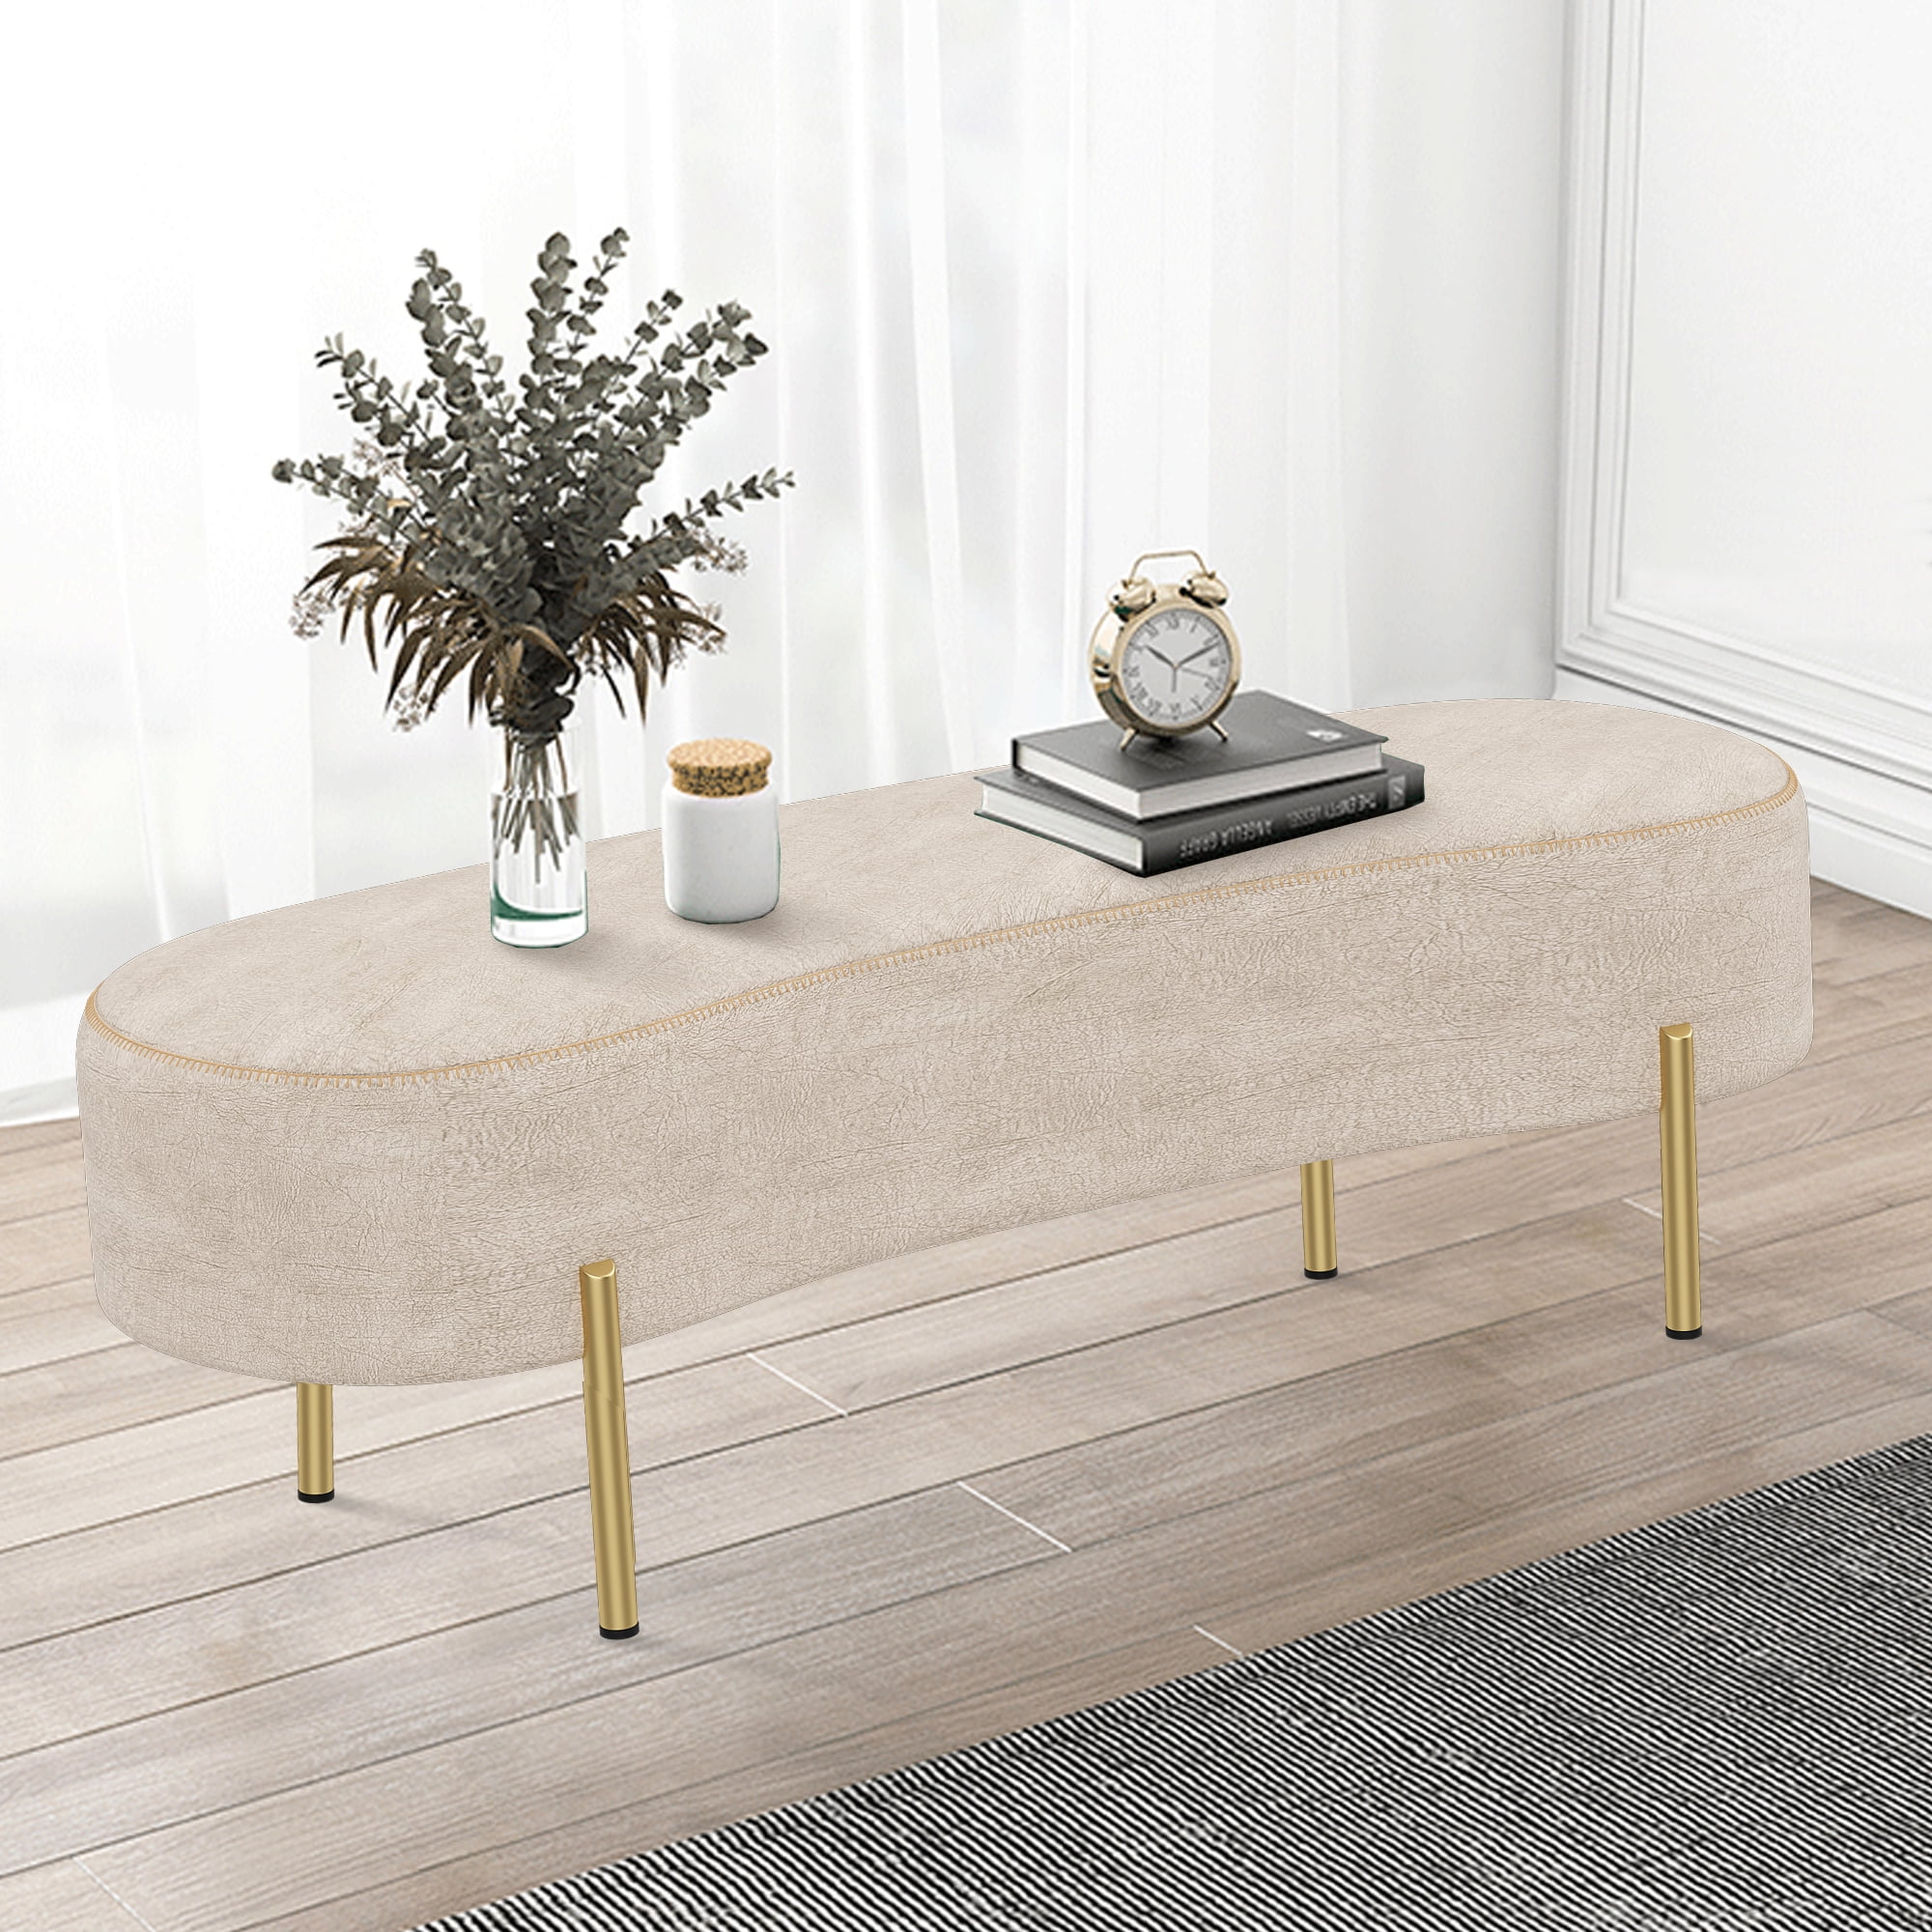 Andeworld Upholstered Ottoman Bench for Seat Gold Bench Bedroom Indoor Living with Legs,Sitting Bench Benches(Beige) Room